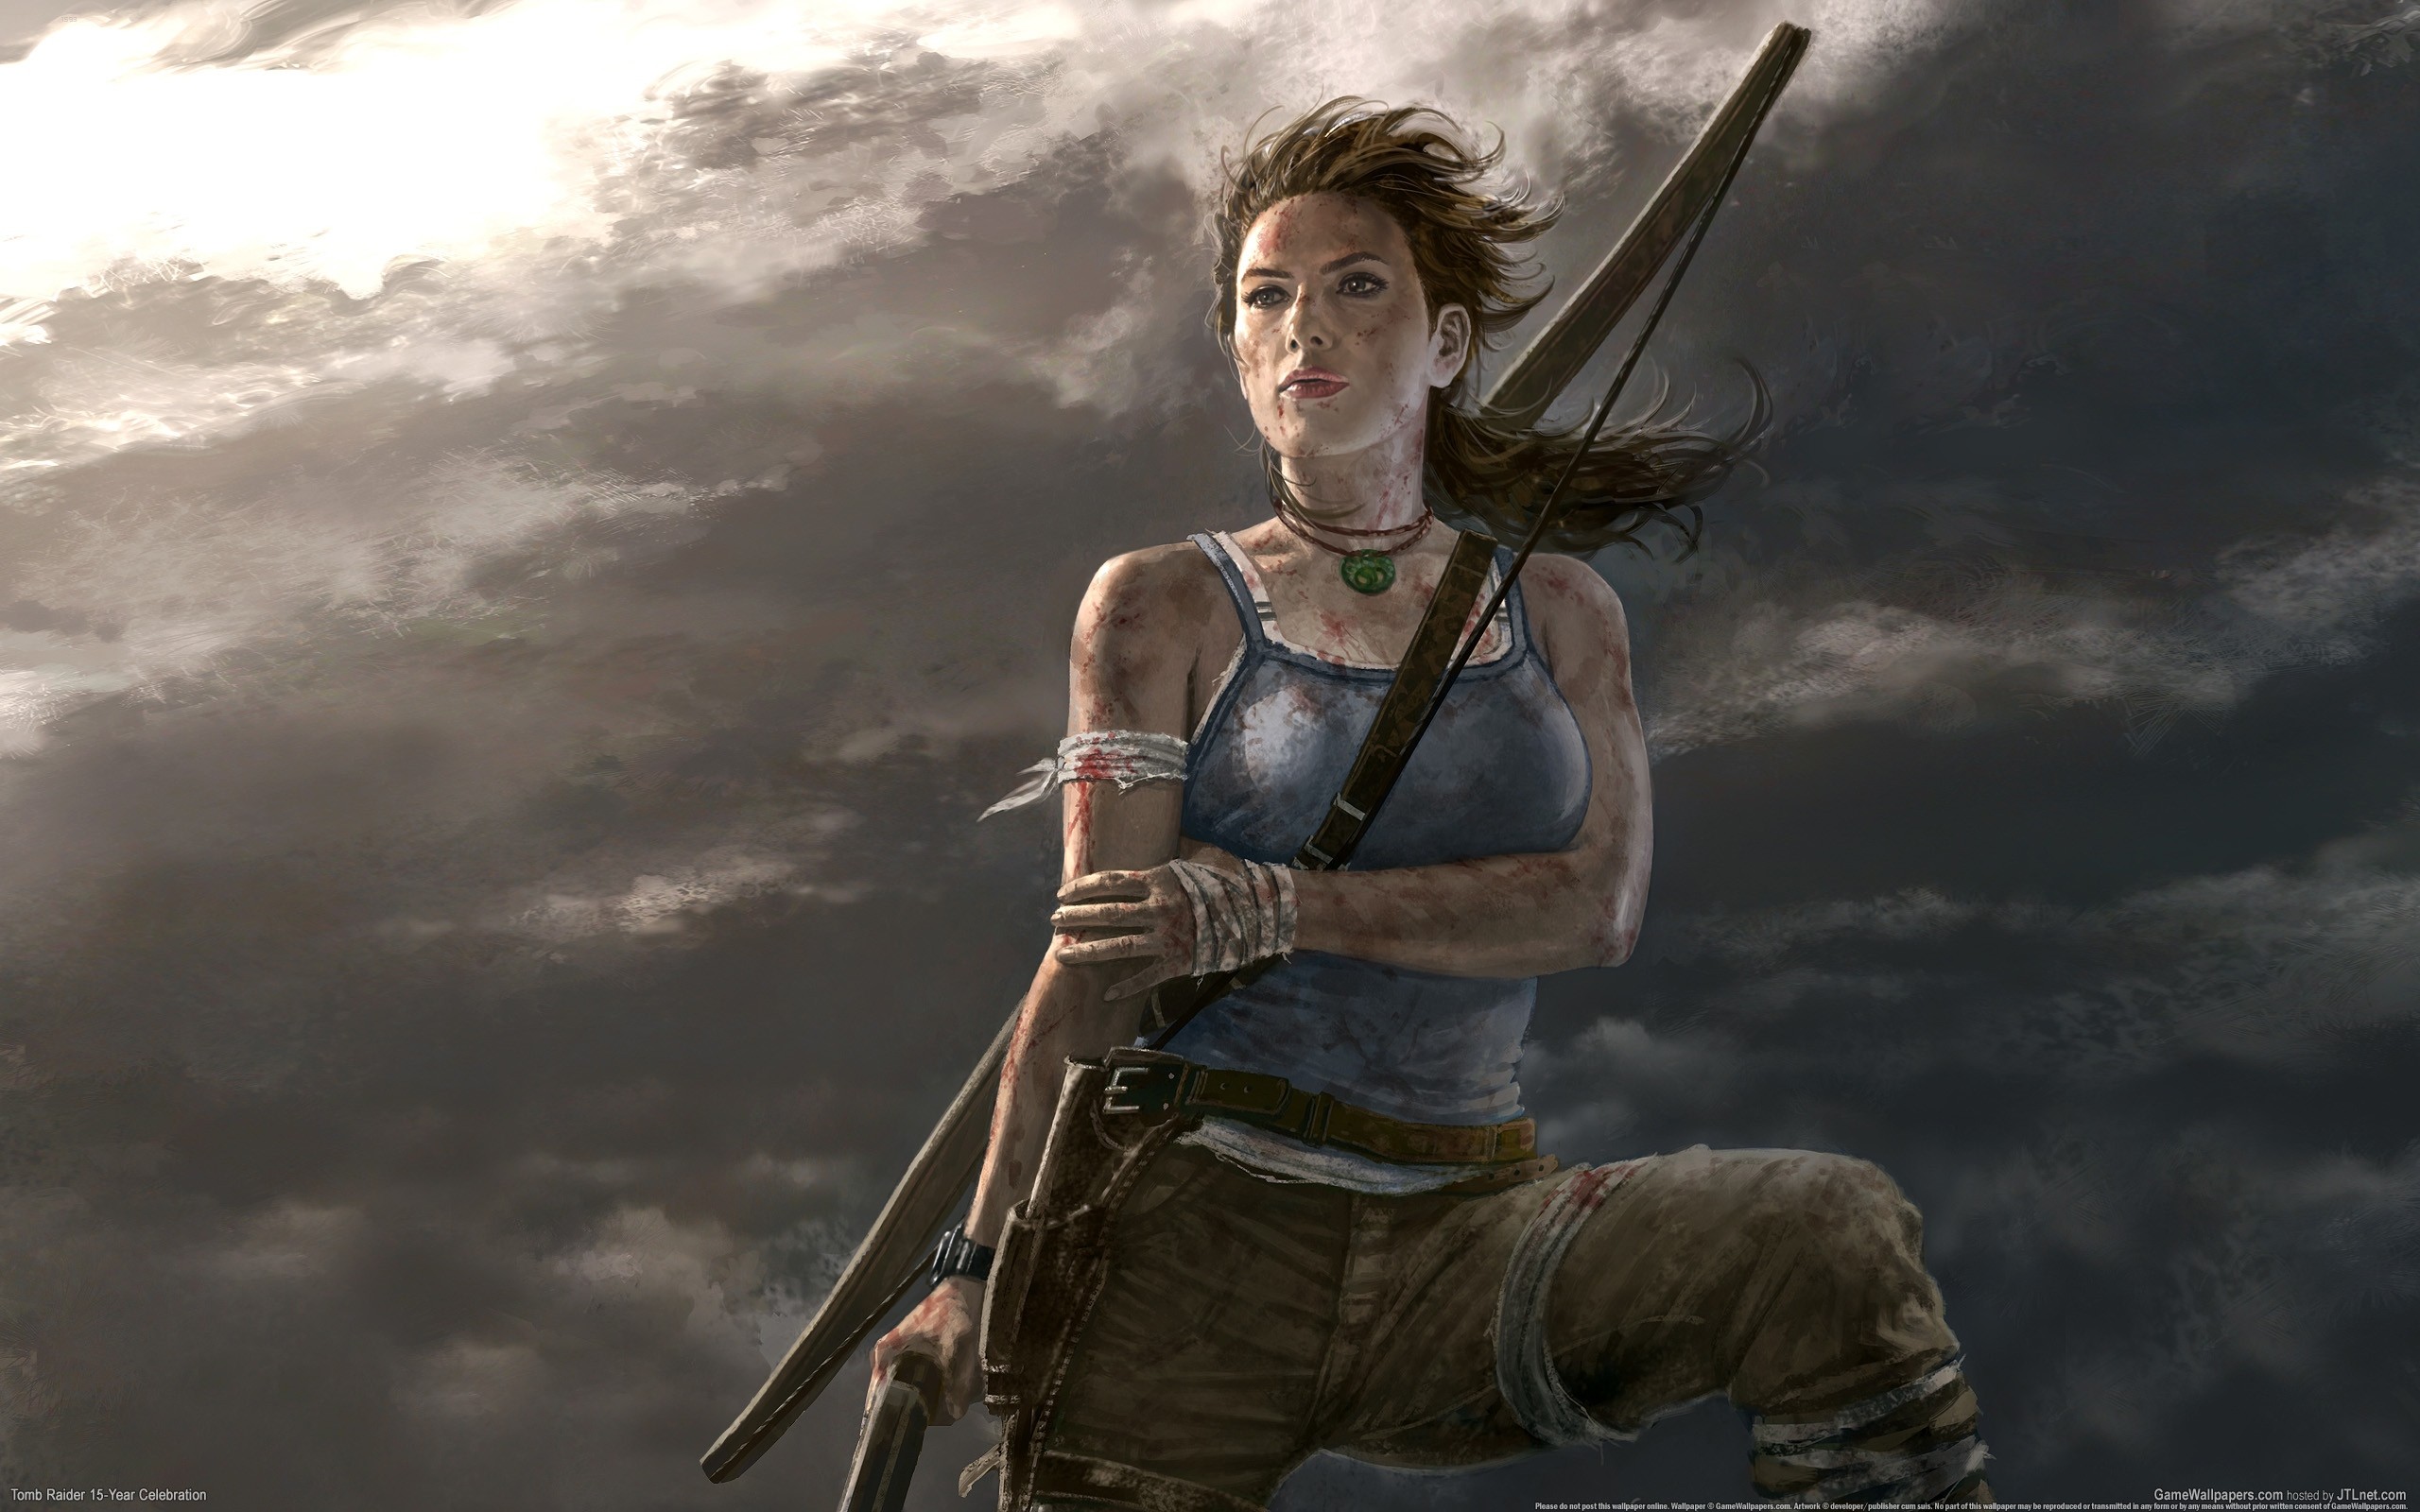 General 2560x1600 video games video game characters video game girls Tomb Raider fan art artwork PC gaming video game art blood wounds bow gun necklace brunette Lara Croft (Tomb Raider) Tomb Raider: 15-Year Celebration